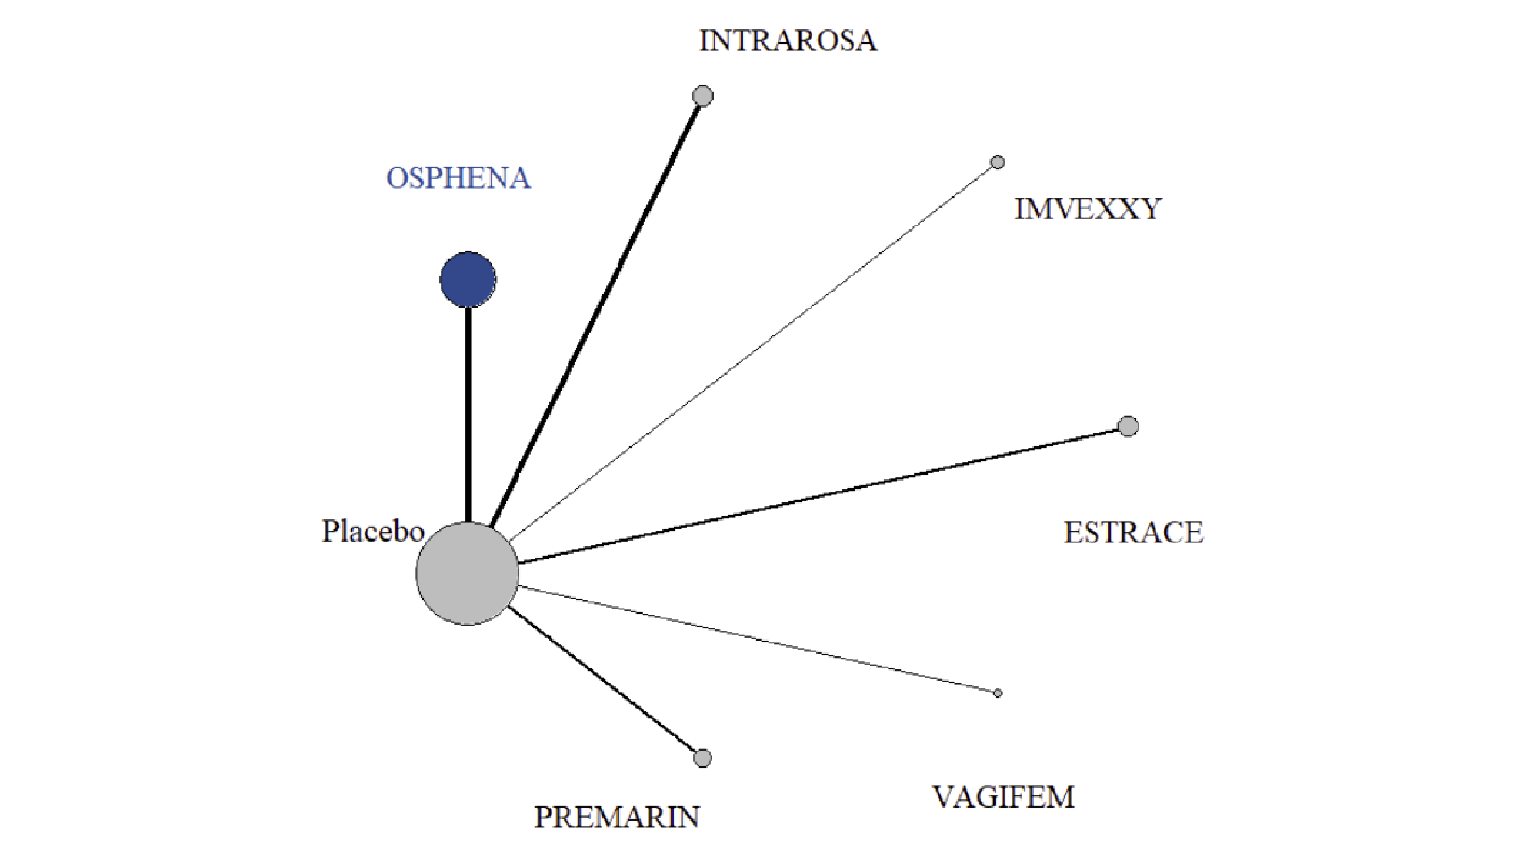 The evidence network for the increase in the percentage of superficial cells at 12 weeks is shown for the sponsor-submitted indirect treatment comparison. In the network, Osphena, Intrarosa, Imvexxy, Estrace, Vagifem, and Premarin are connected to each other indirectly through the placebo node.